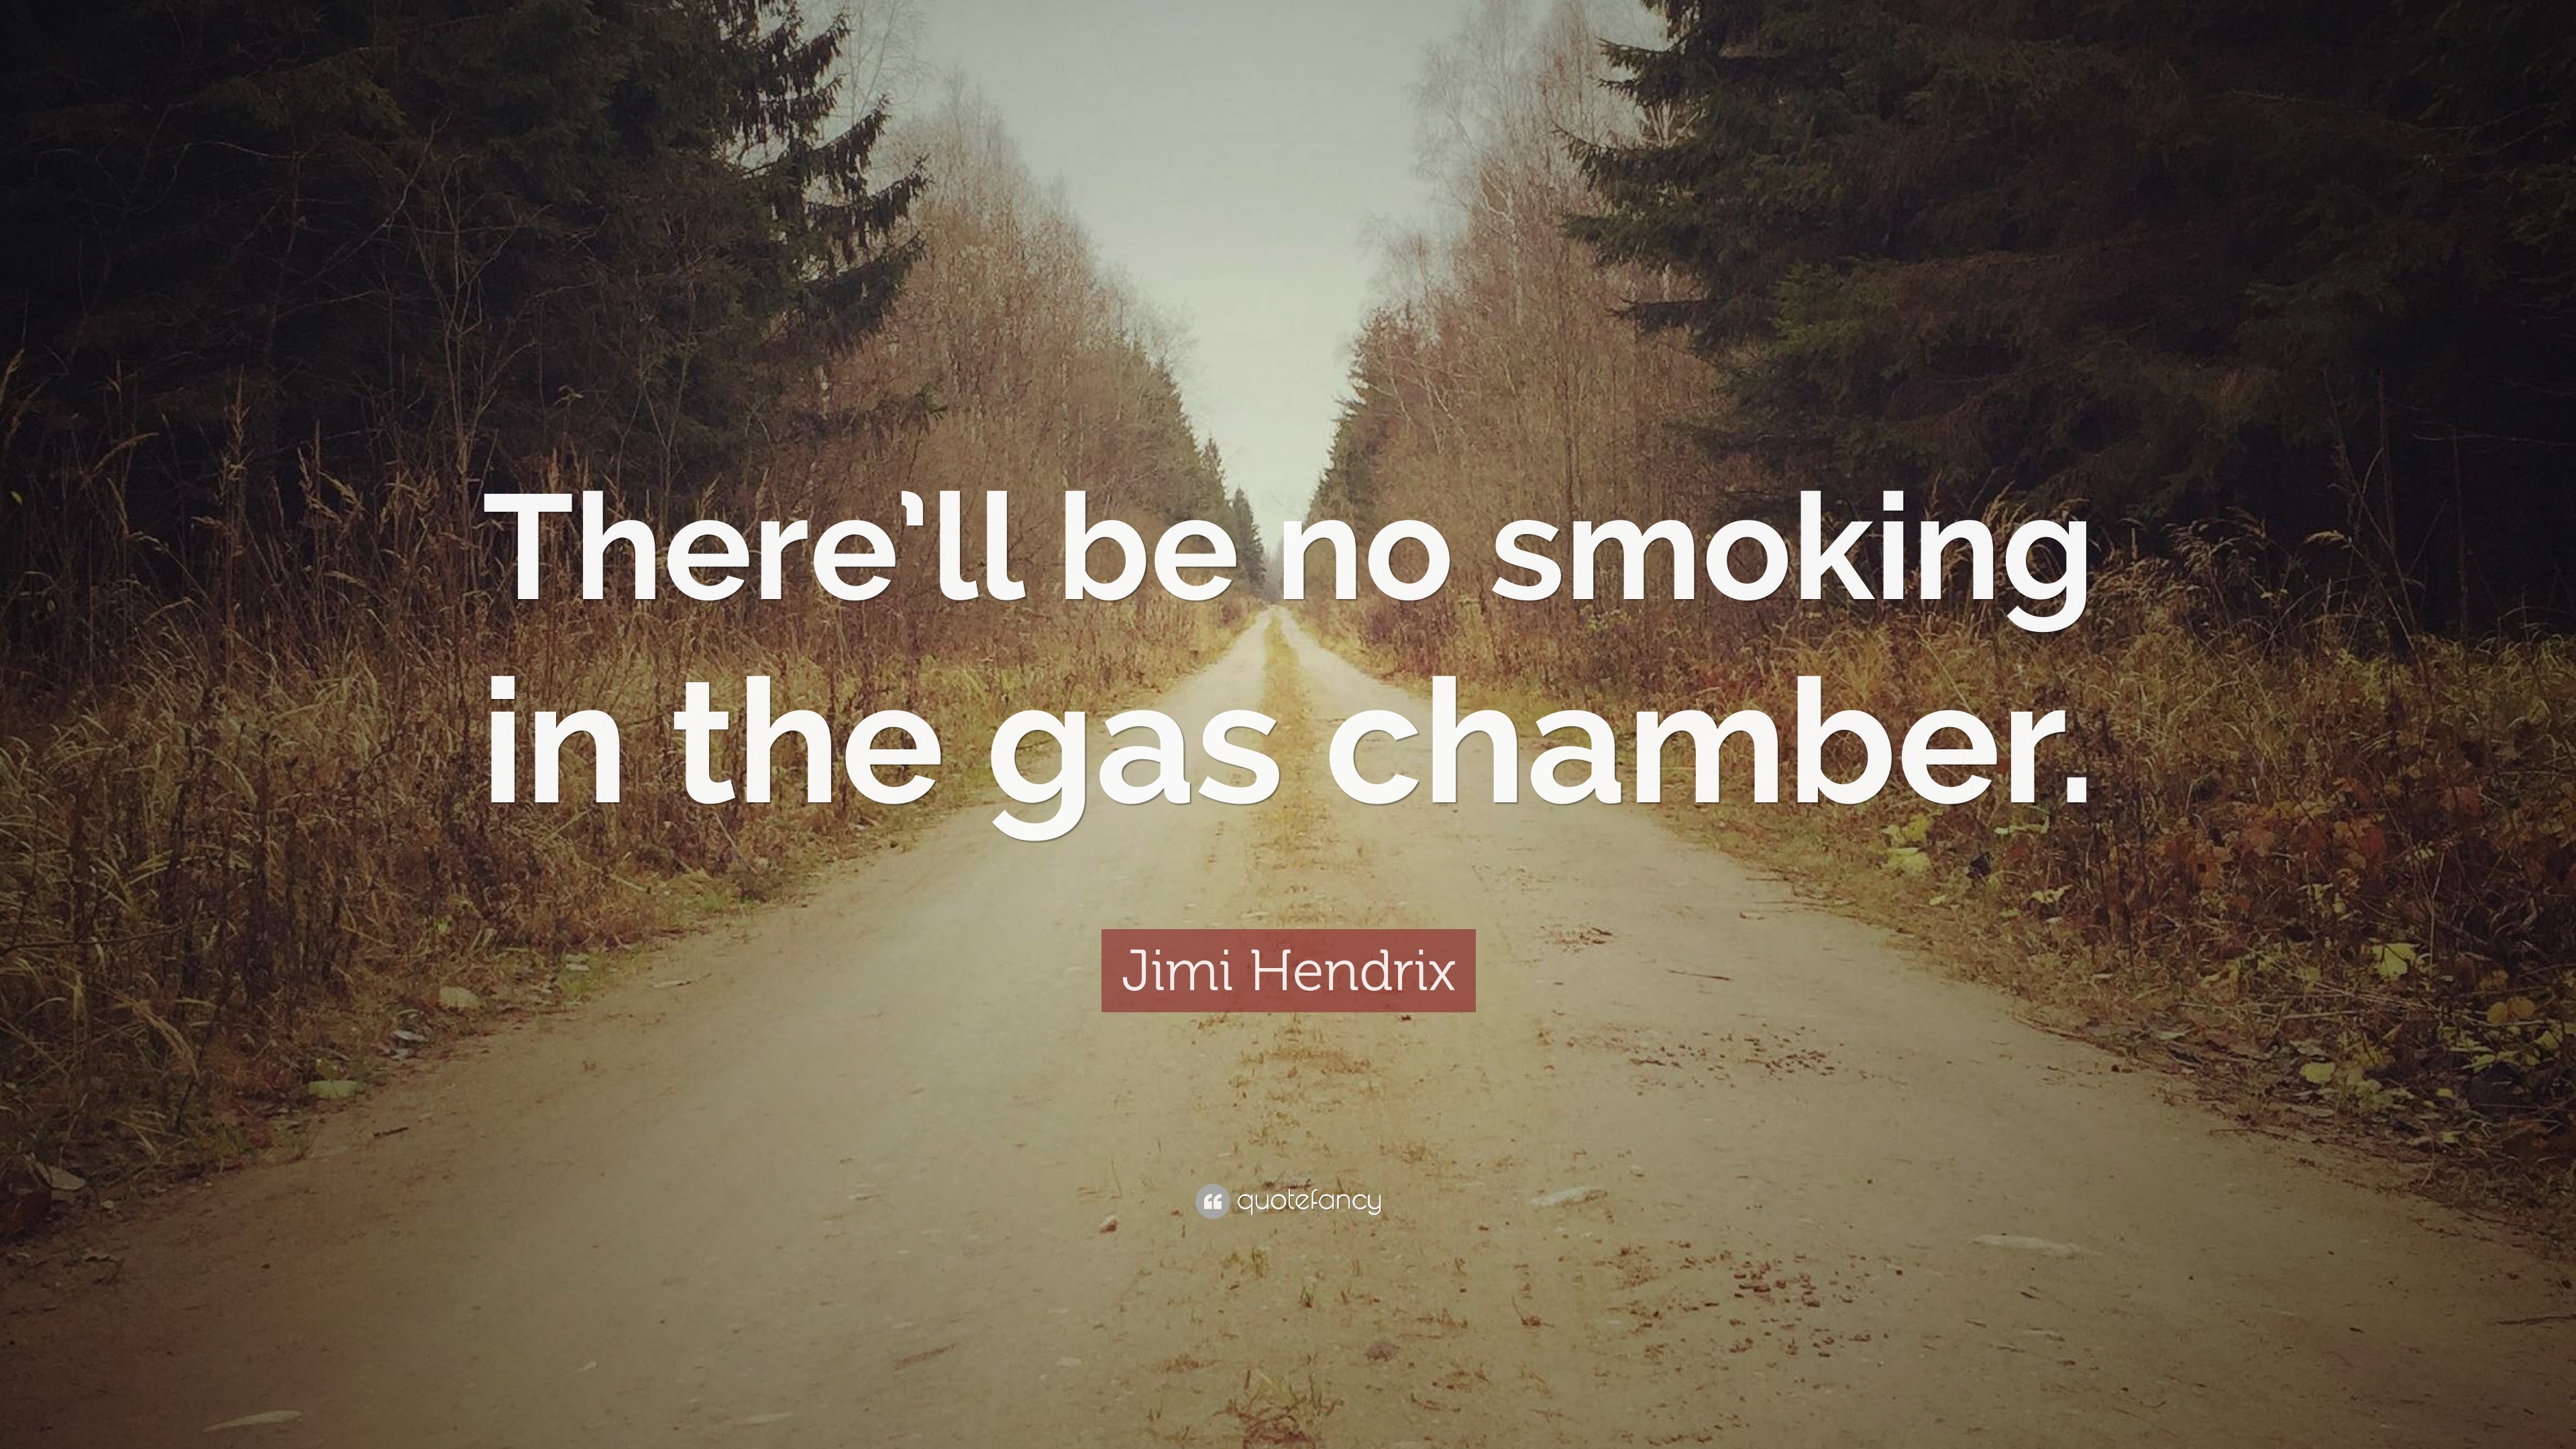 Jimi Hendrix Quote: “There'll be no smoking in the gas chamber.”